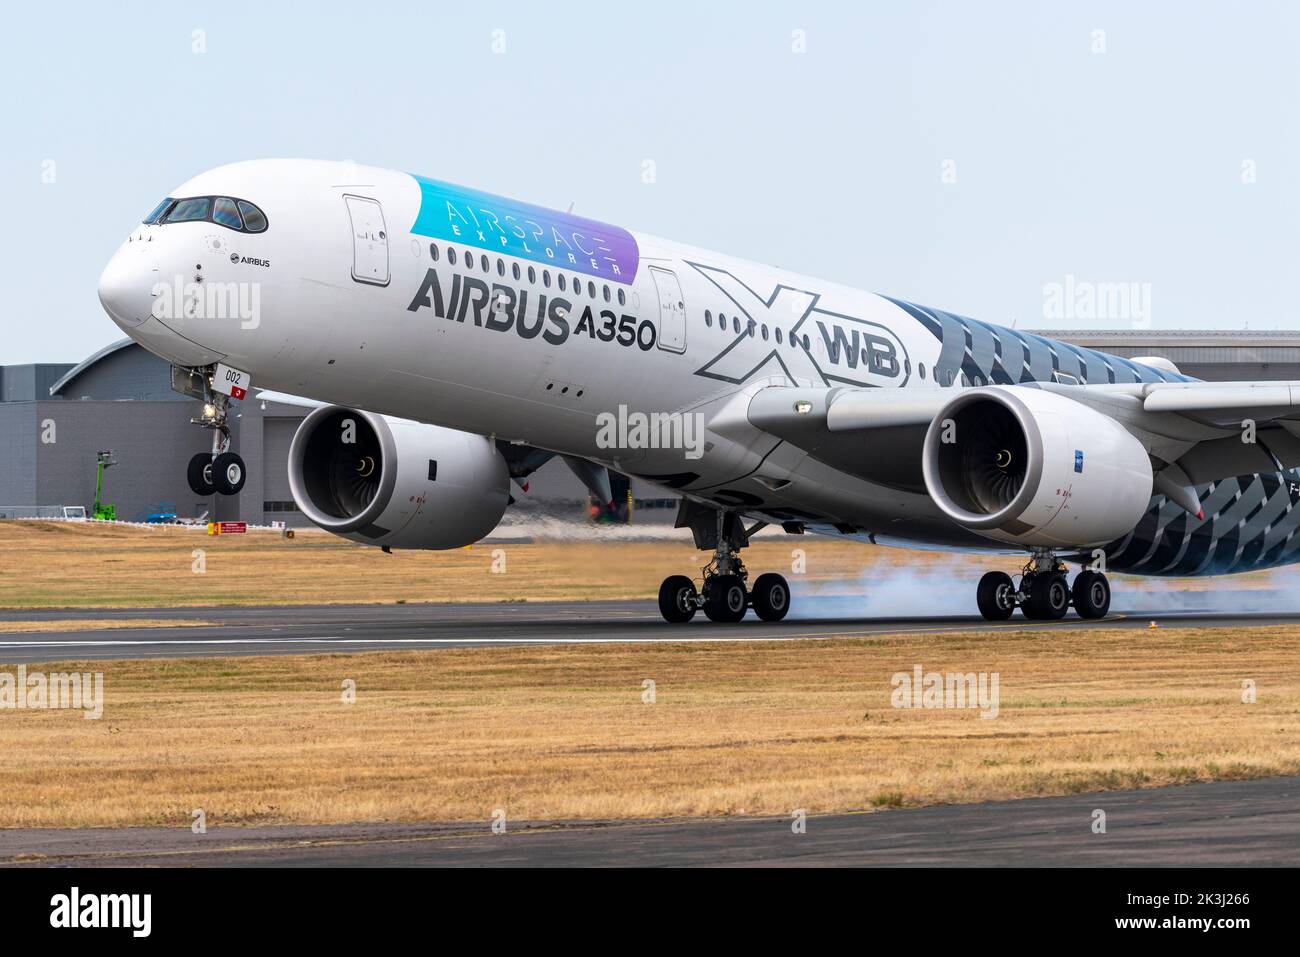 Airbus A350 airliner jet plane landing after display at the Farnborough International Airshow 2022. A350 900 test aircraft touching down after display Stock Photo